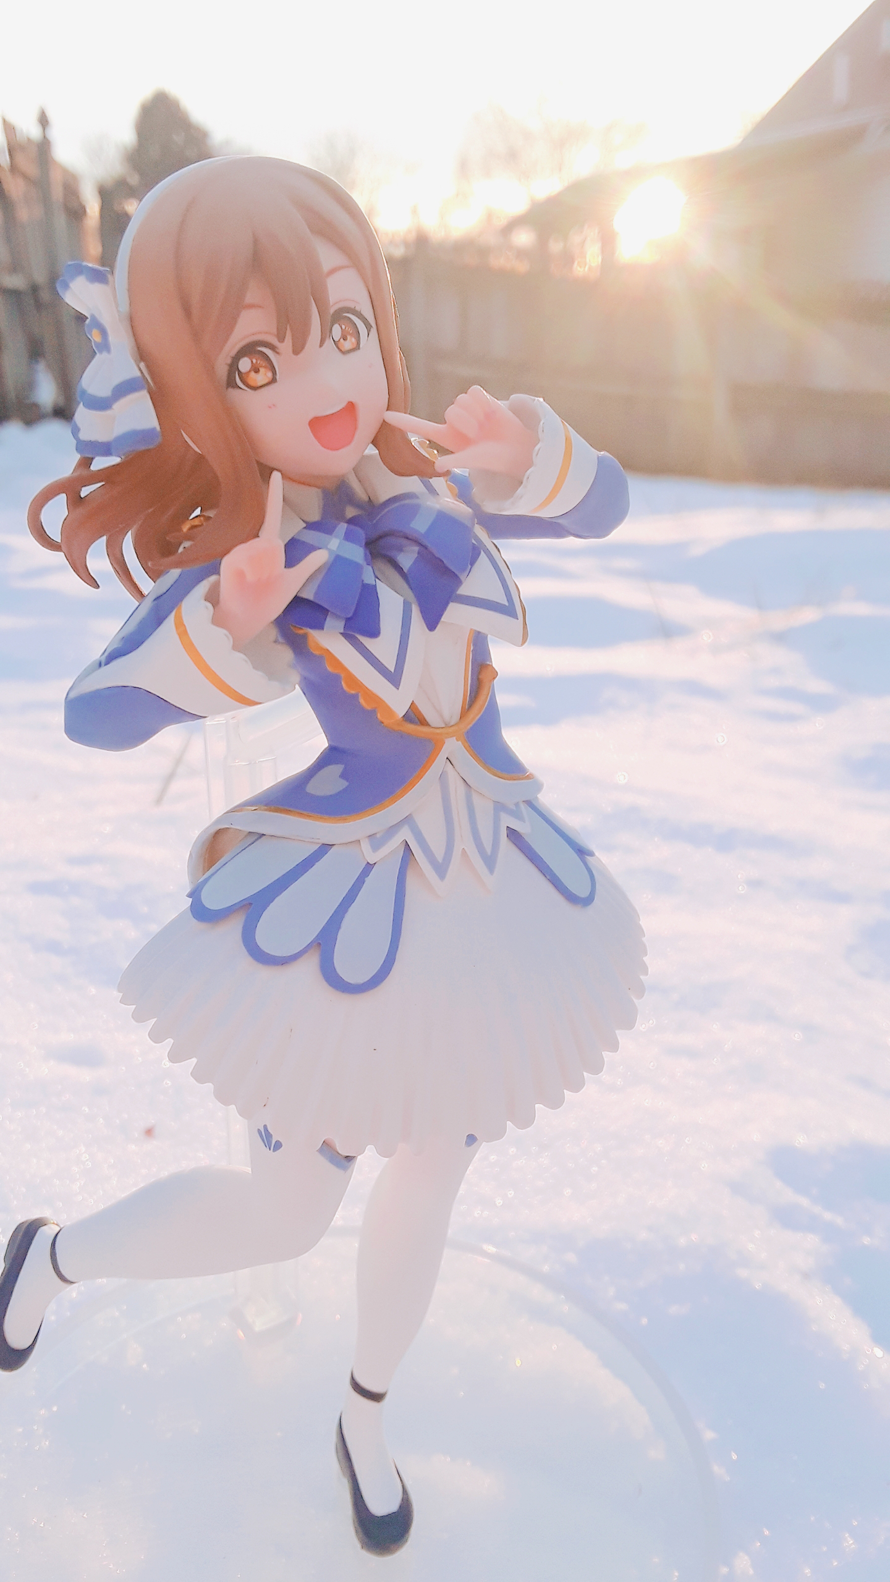 Decided to take my Hanamaru out for a lovely winter walk to celebrate finally having snow this year!...